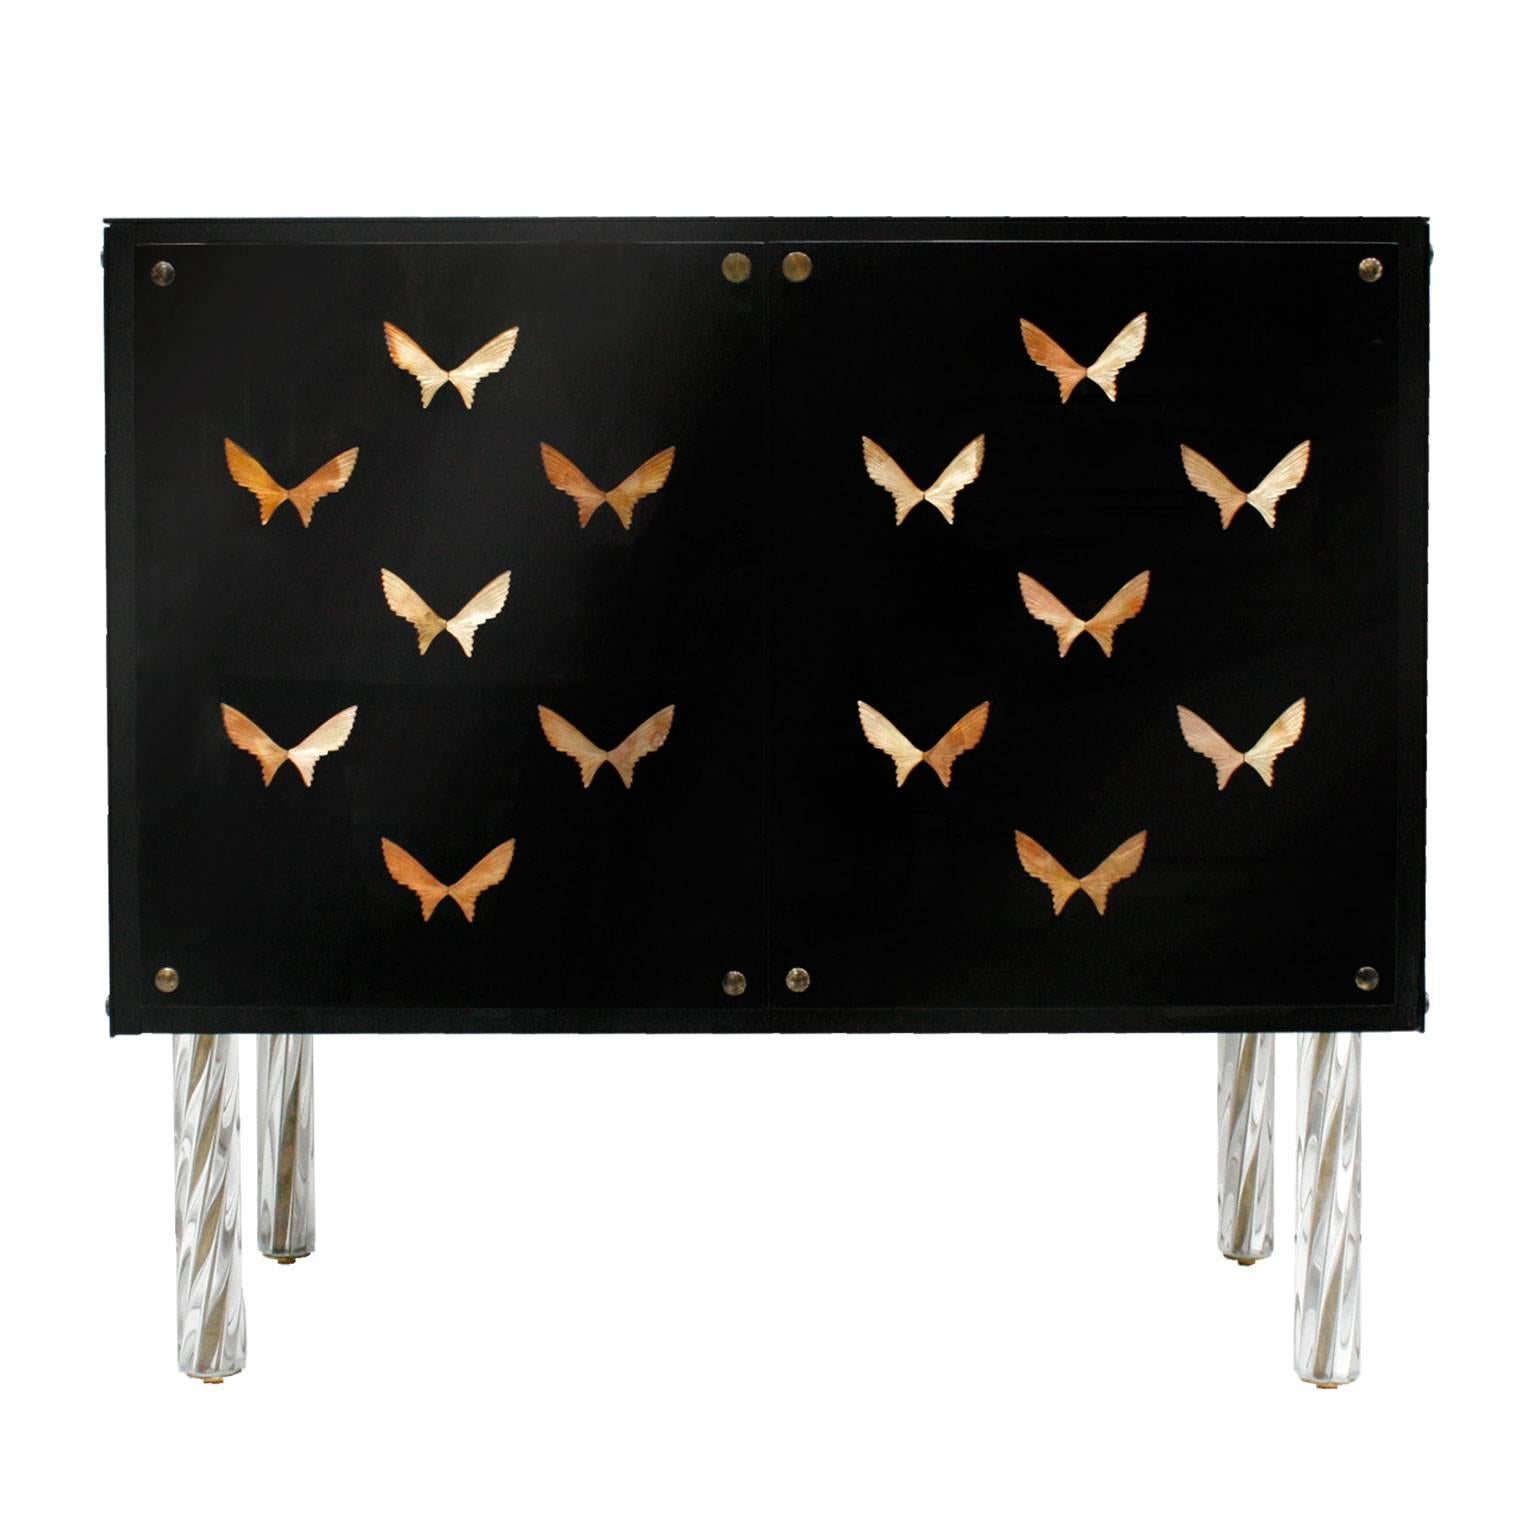 Pair of commodes, with wood structure covered in black Lacobel glass and decorated with bronze butterflies.
Legs made in turning glass.